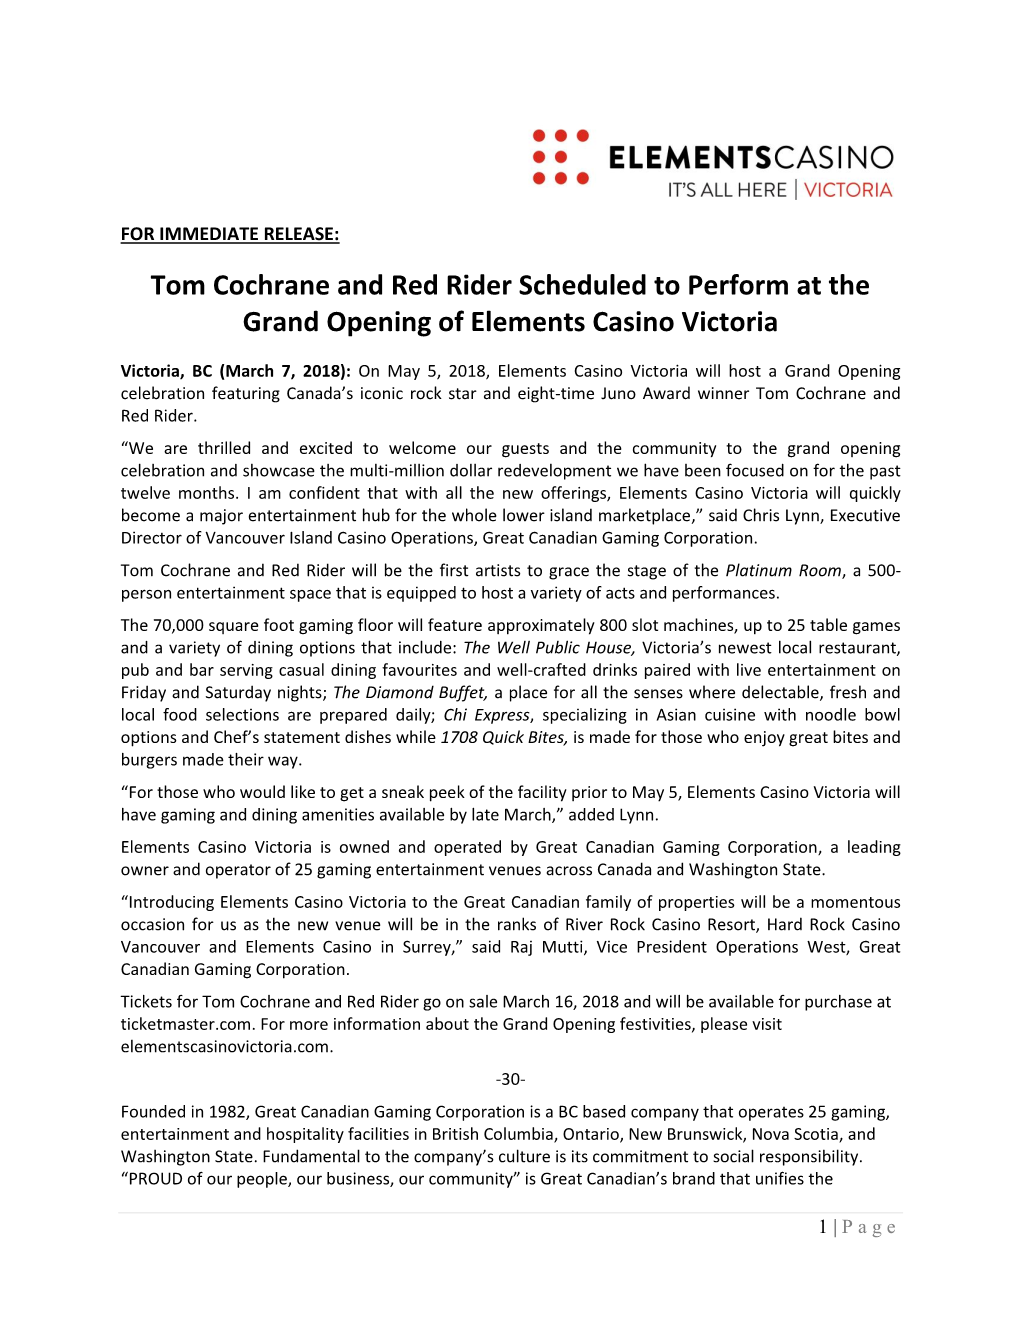 Tom Cochrane and Red Rider Scheduled to Perform at the Grand Opening of Elements Casino Victoria